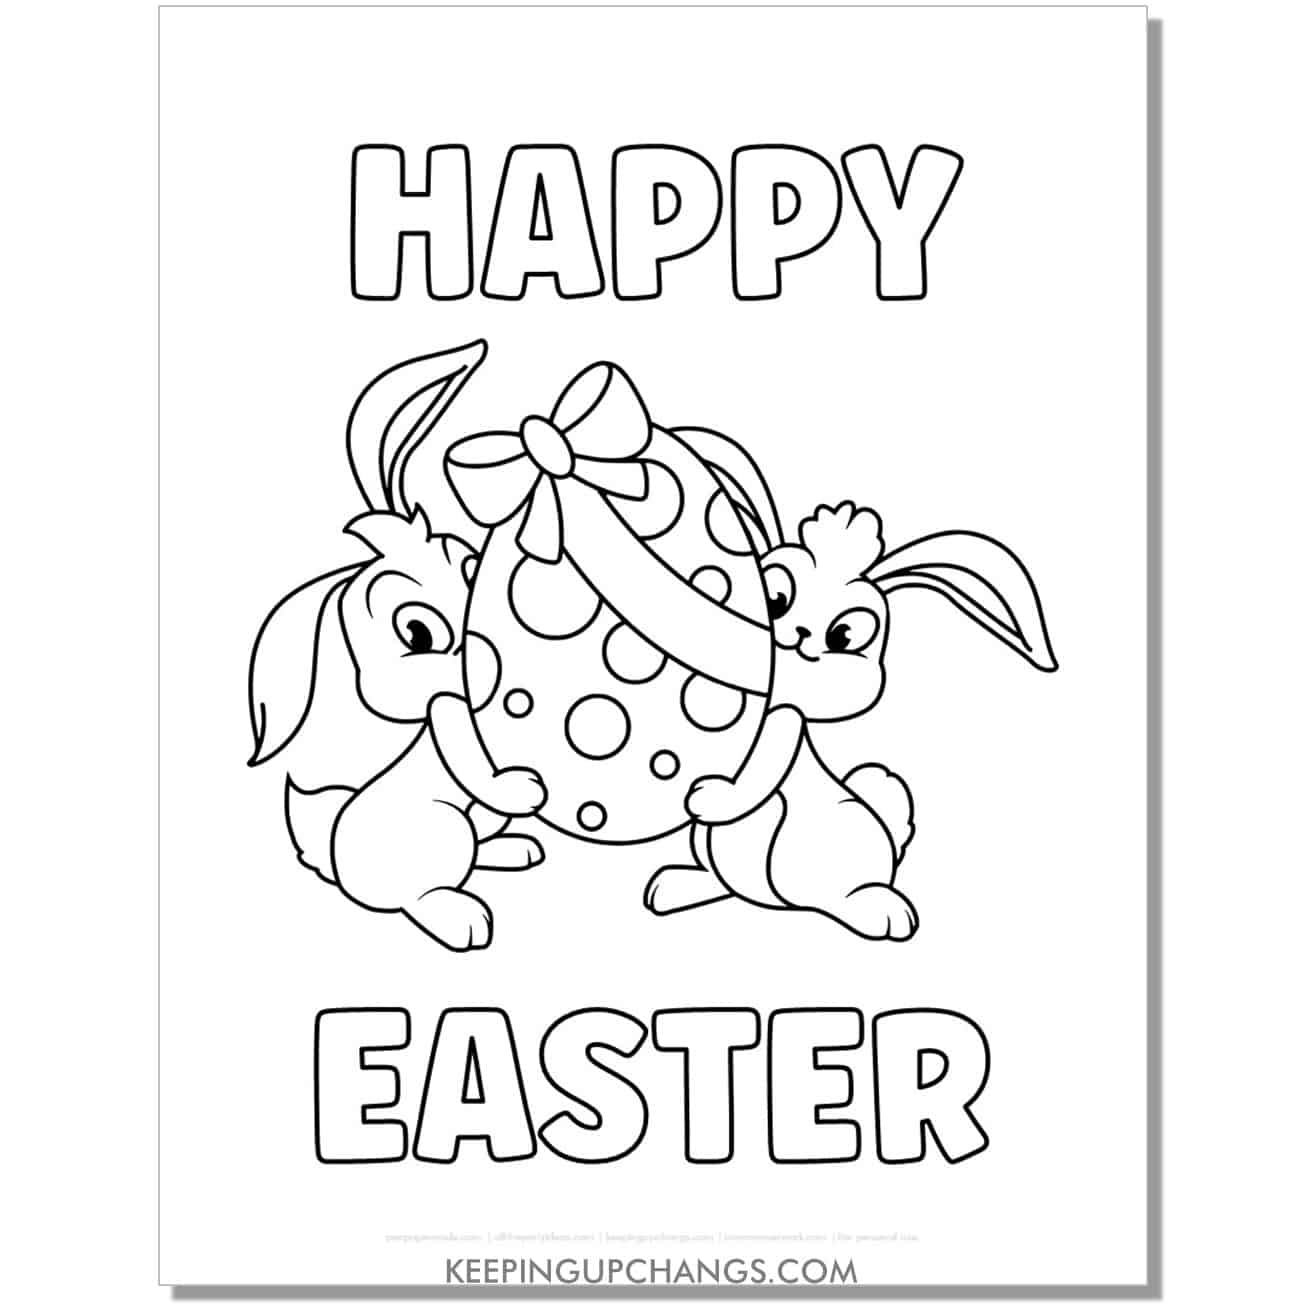 happy easter bunnies holding egg up coloring page, sheet.